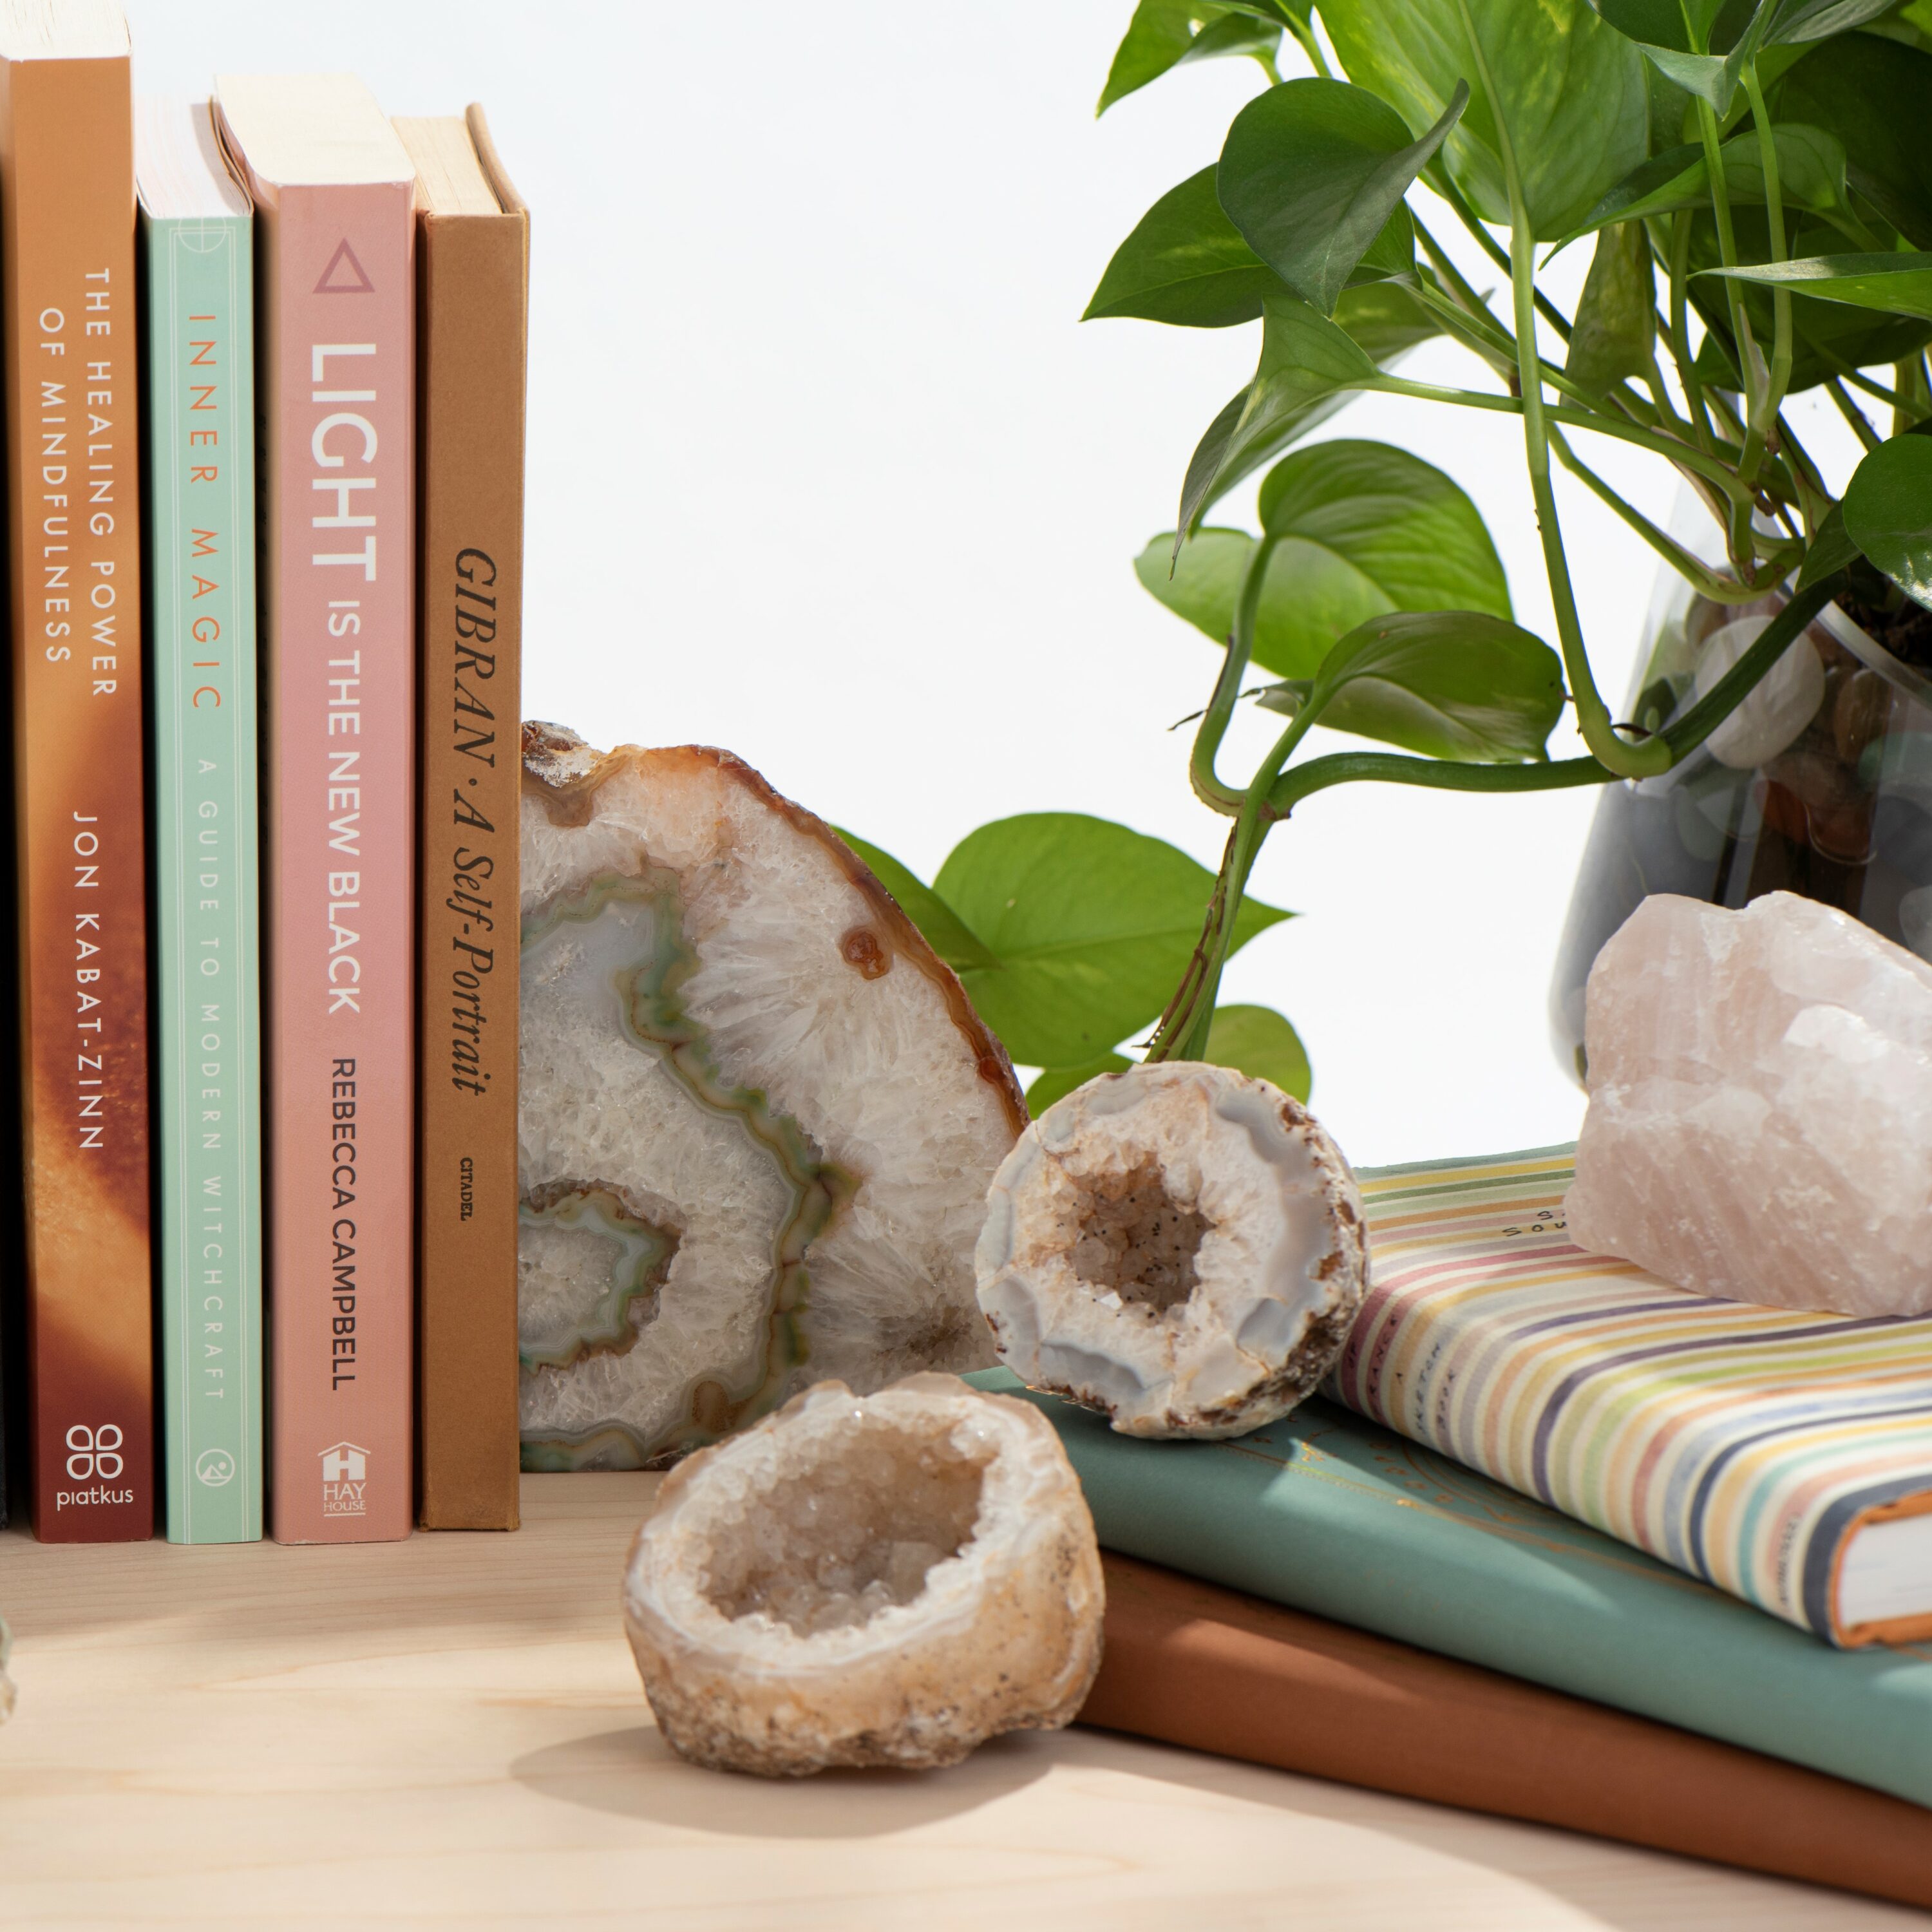 a homescape evoking sanctuary with bookends, geodes, and books